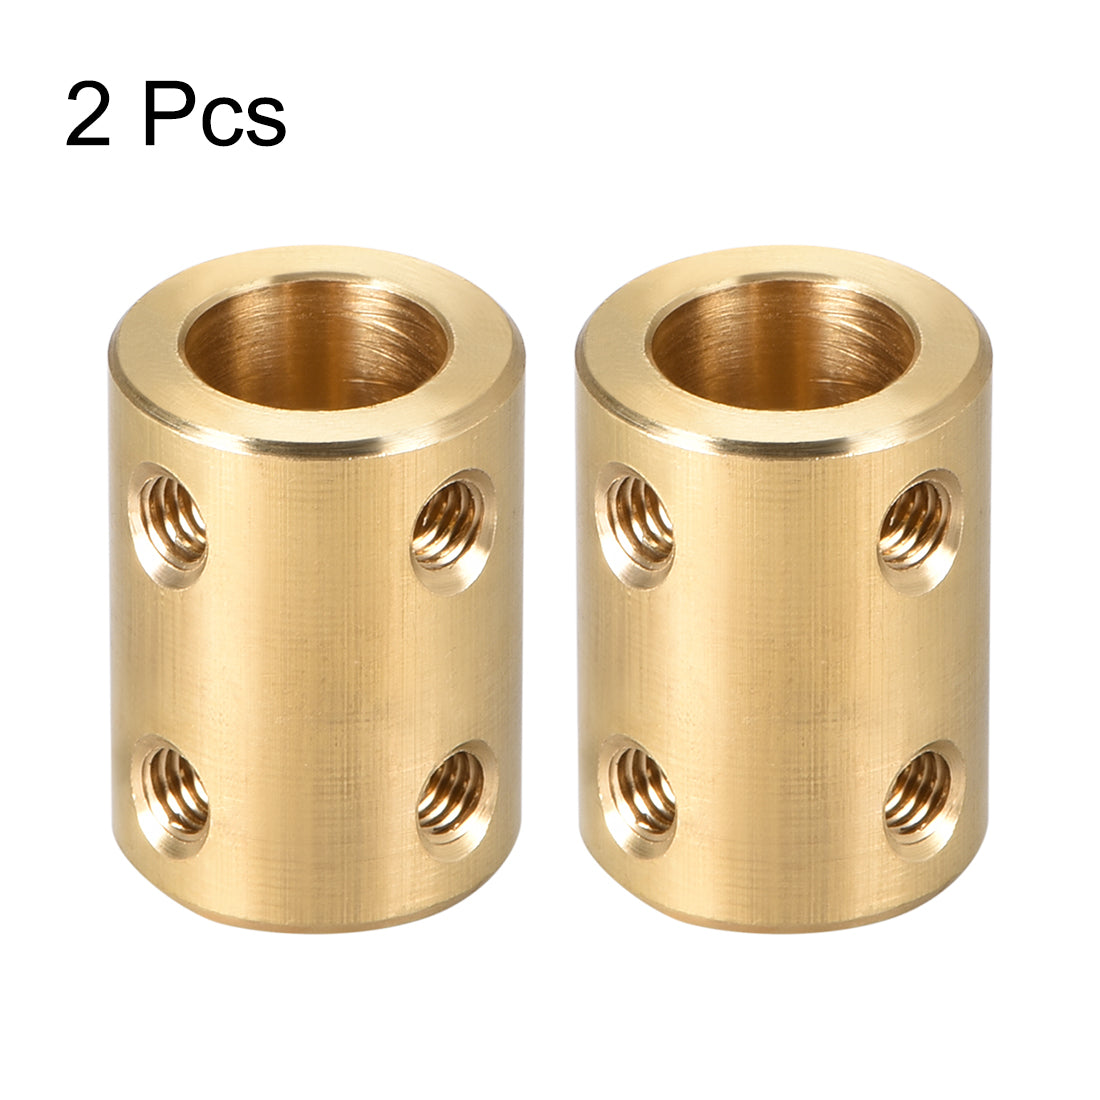 uxcell Uxcell Shaft Coupling 10mm to 10mm Bore L22xD16 Robot Motor Wheel Rigid Coupler Connector Gold Tone 2 Pcs